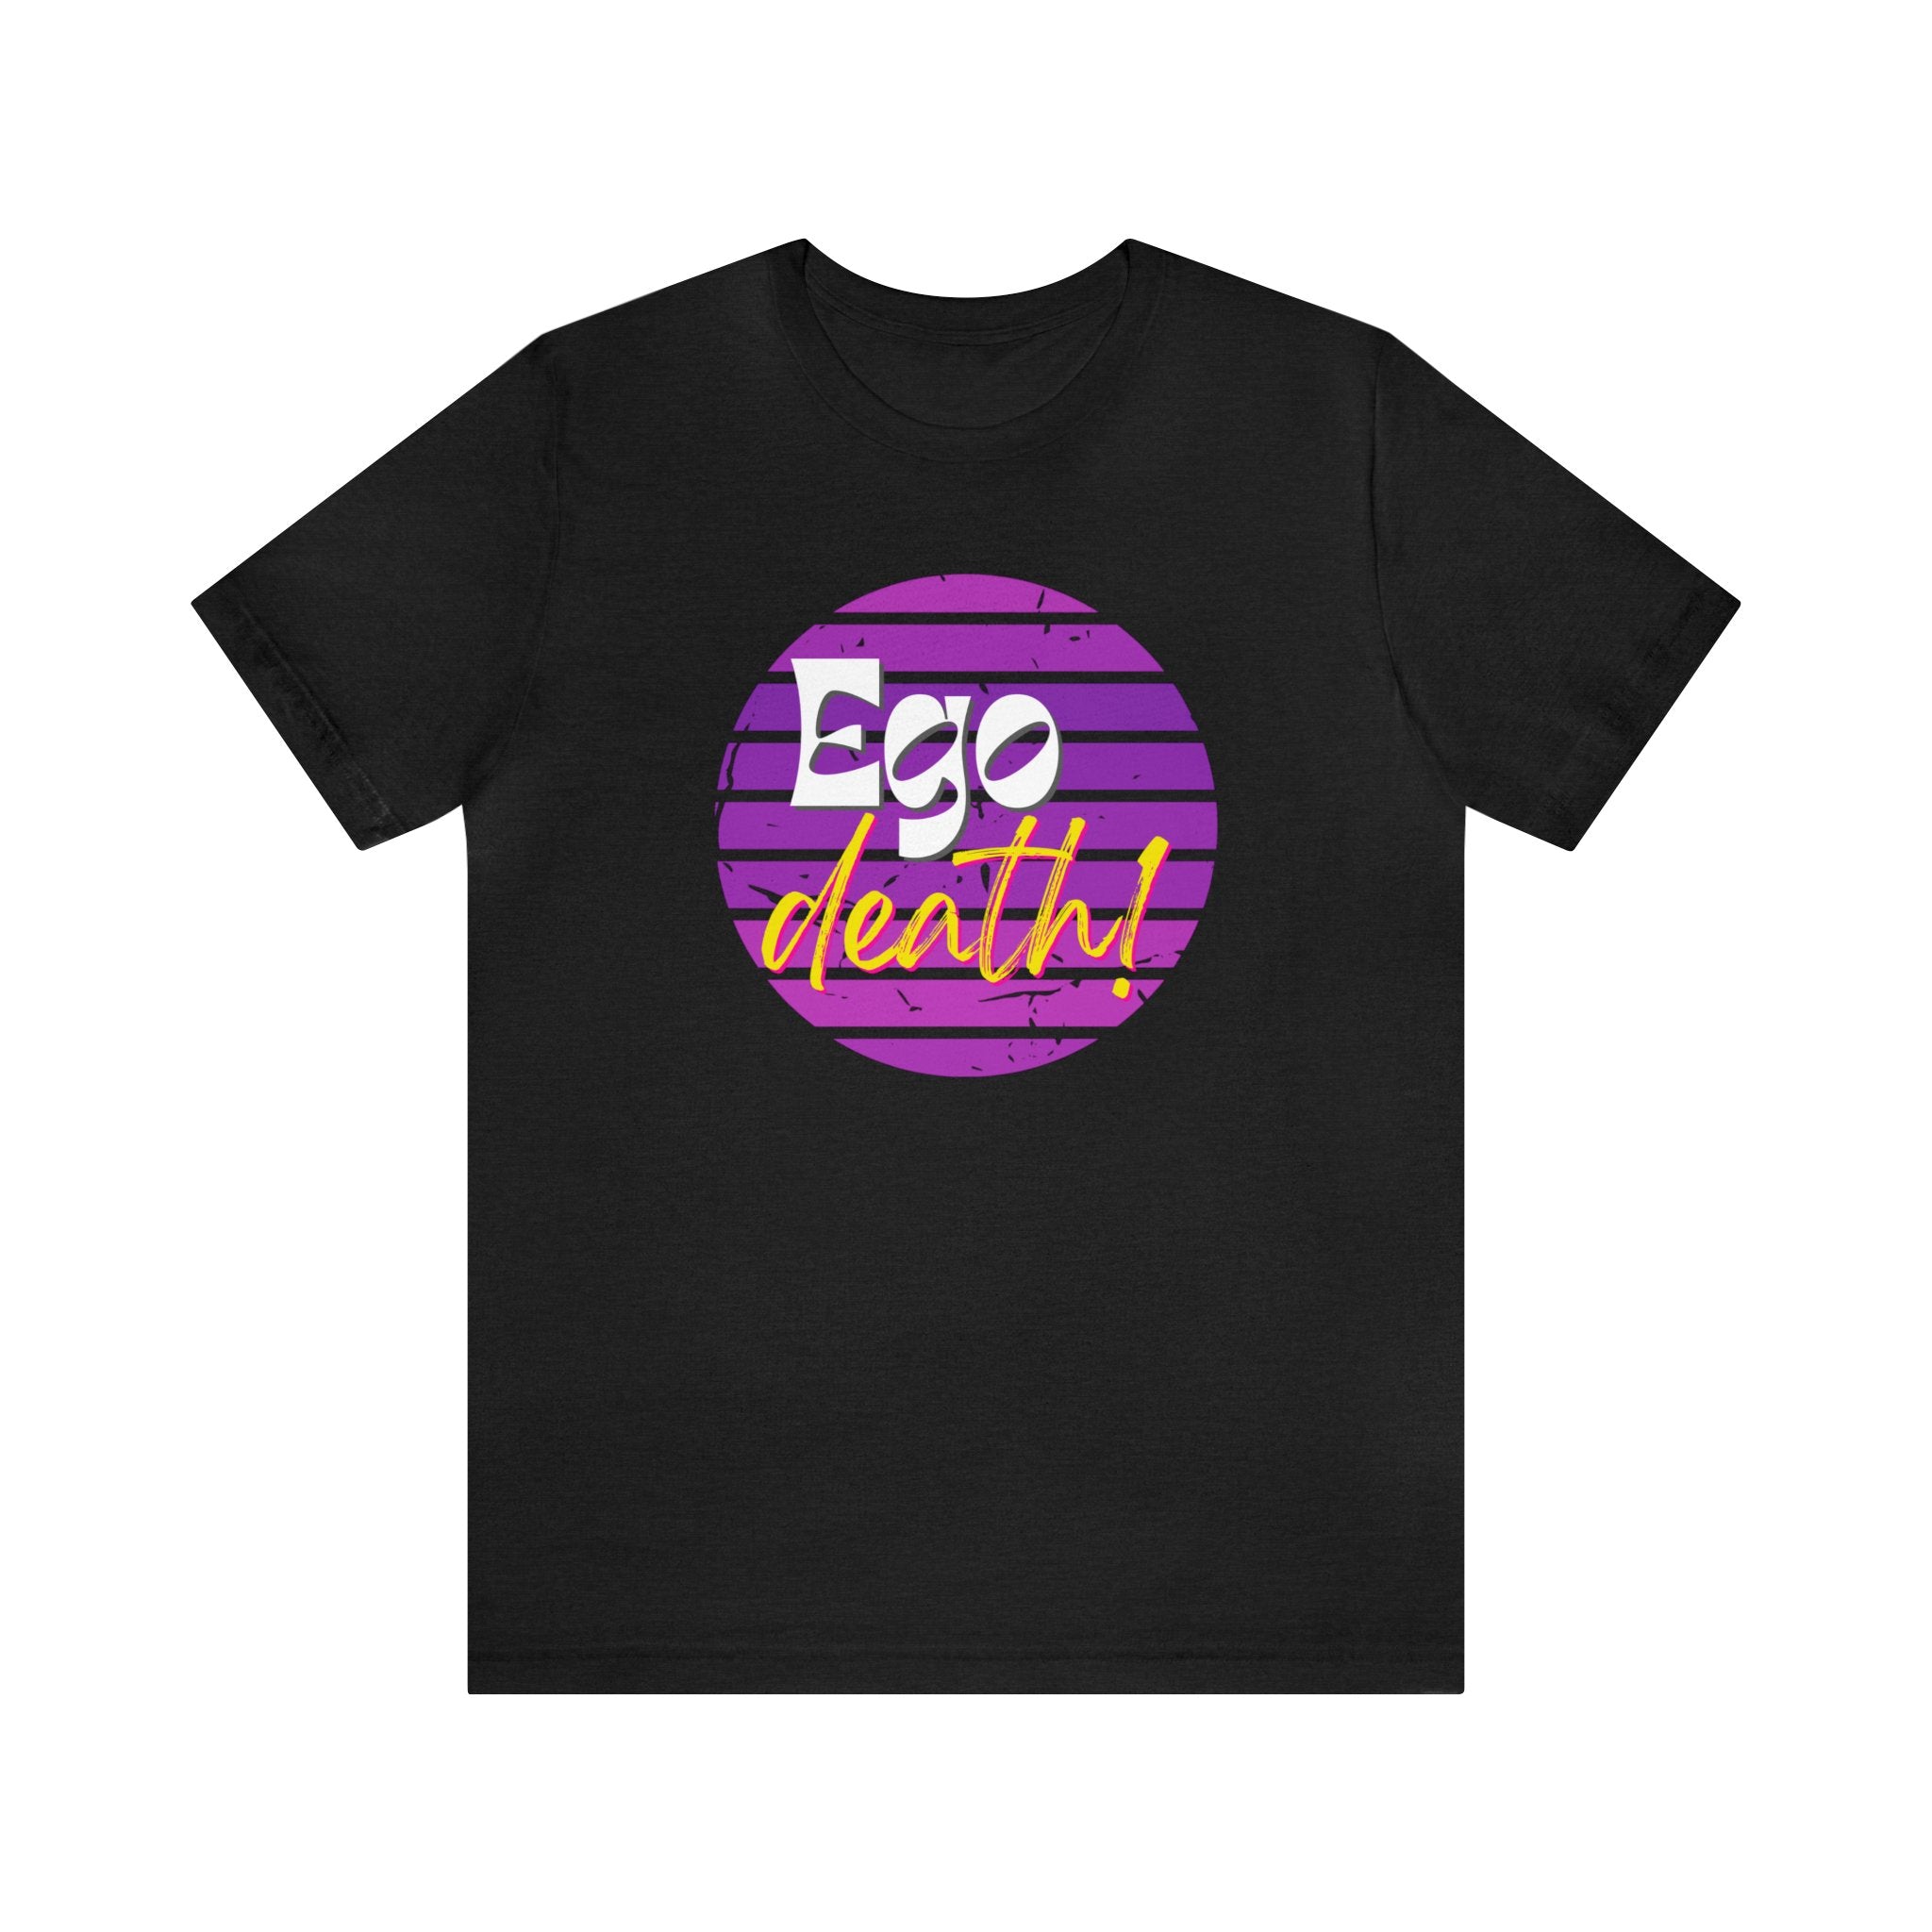 Purple Ego death! Positive Vibes Collection Unisex Jersey Short Sleeve Tee